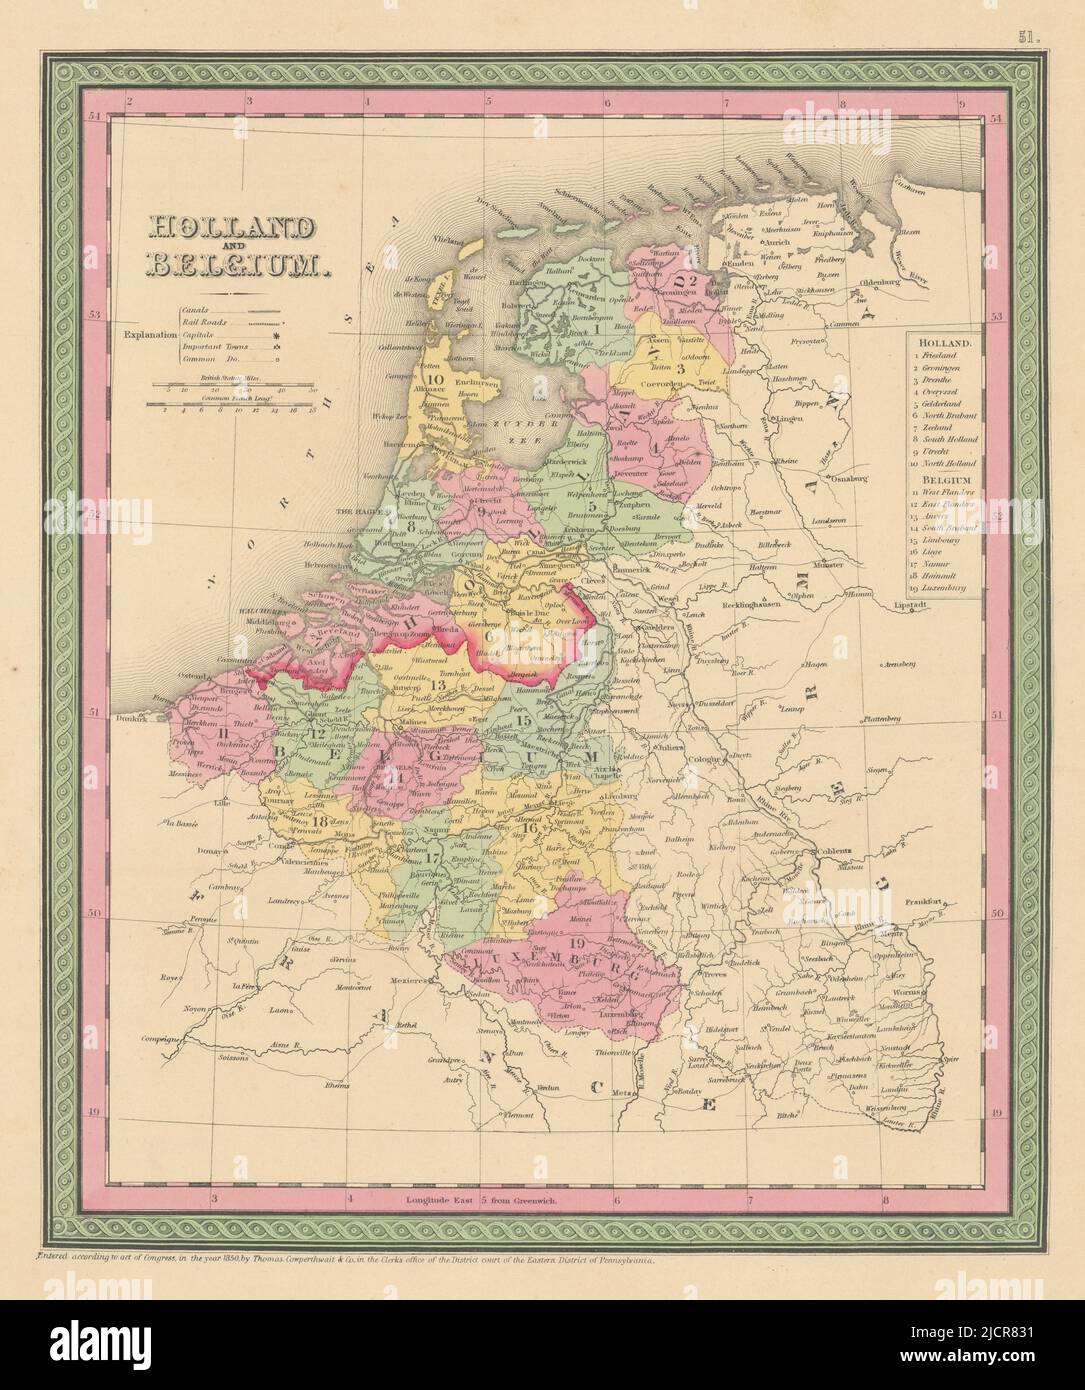 Holland and Belgium. Netherlands Luxembourg. THOMAS, COWPERTHWAIT 1852 old map Stock Photo